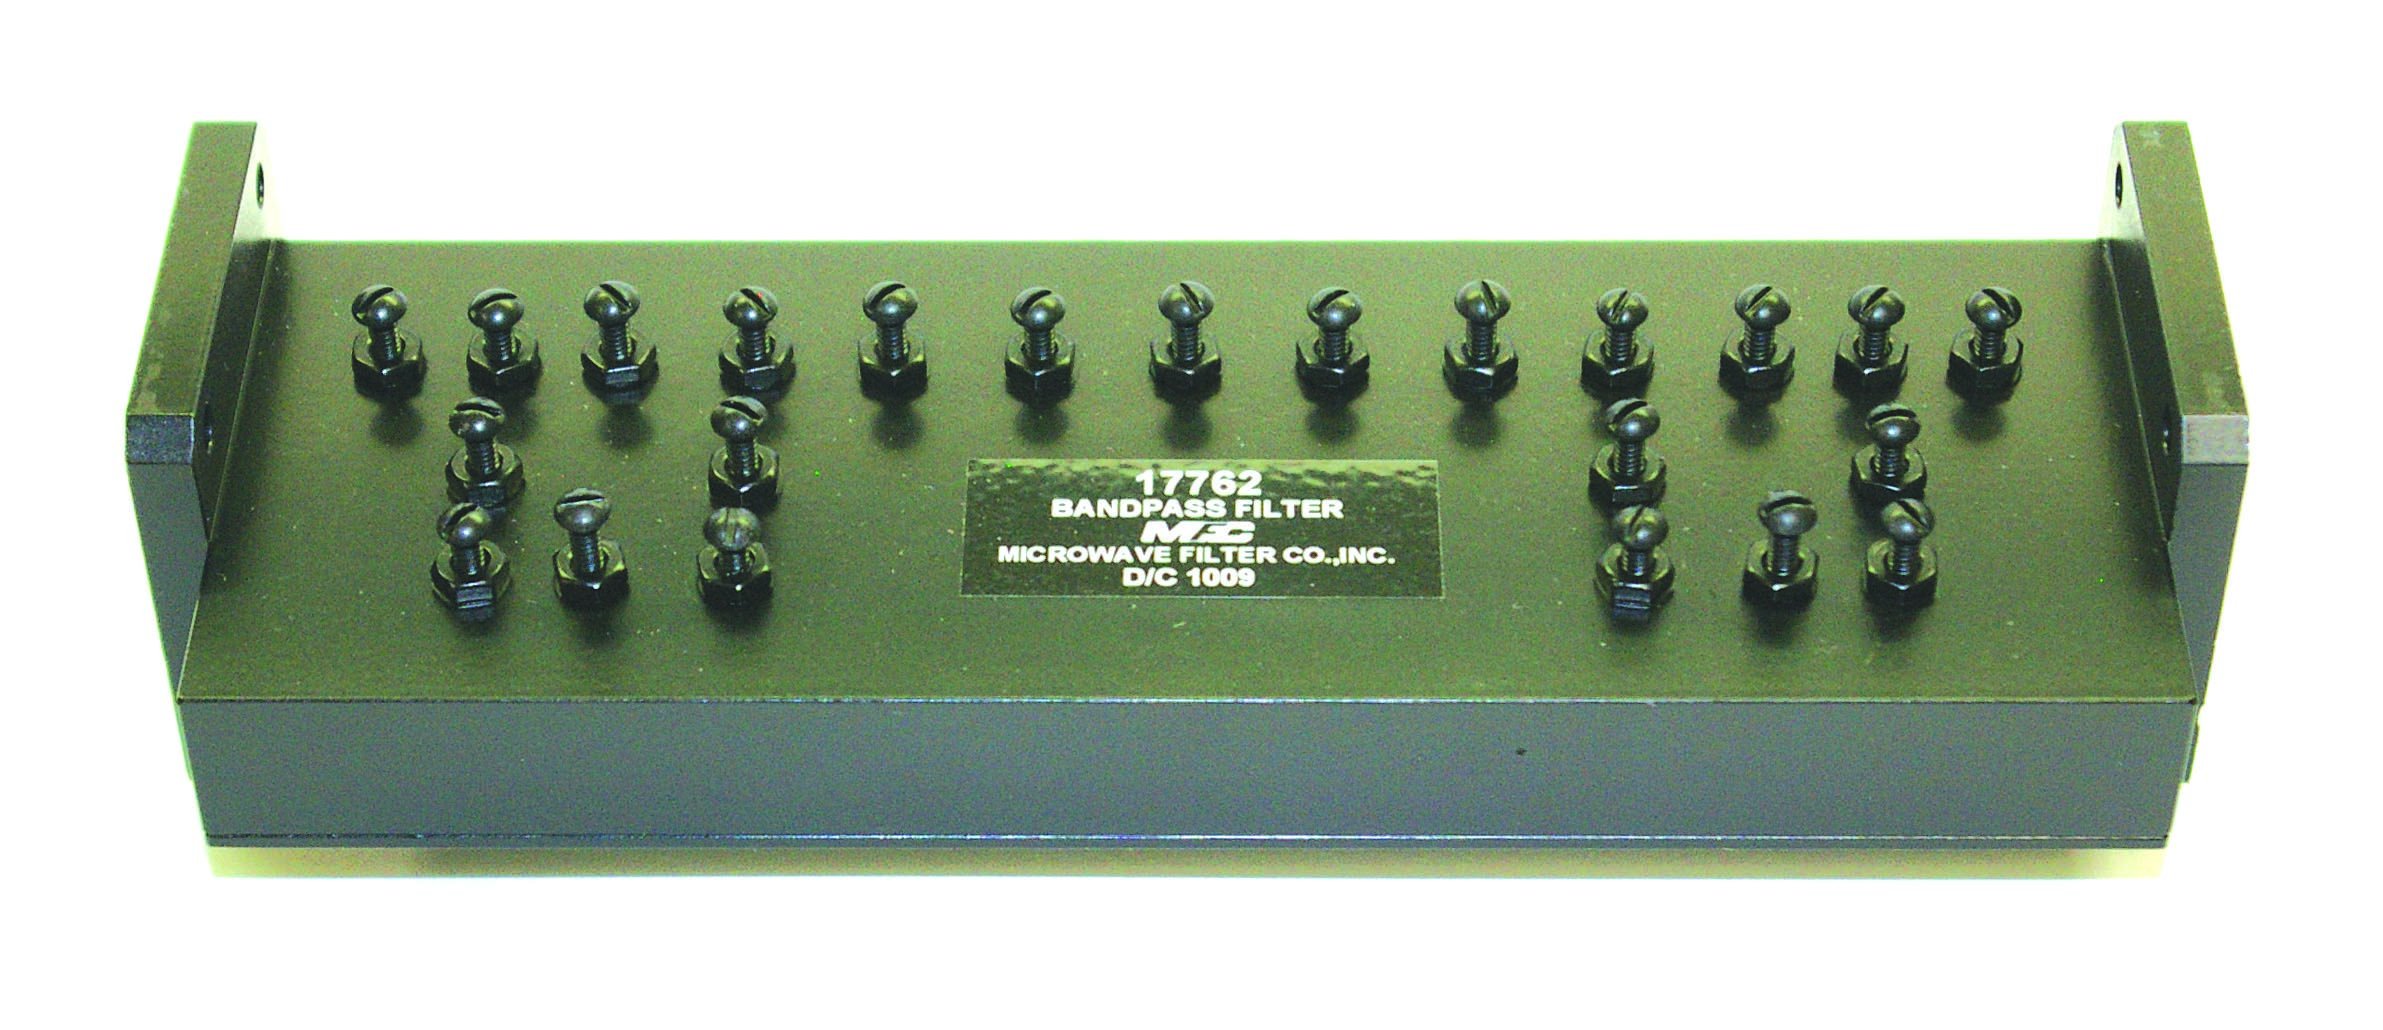 17762/17763 X-Band Transmit/Reject Filter 